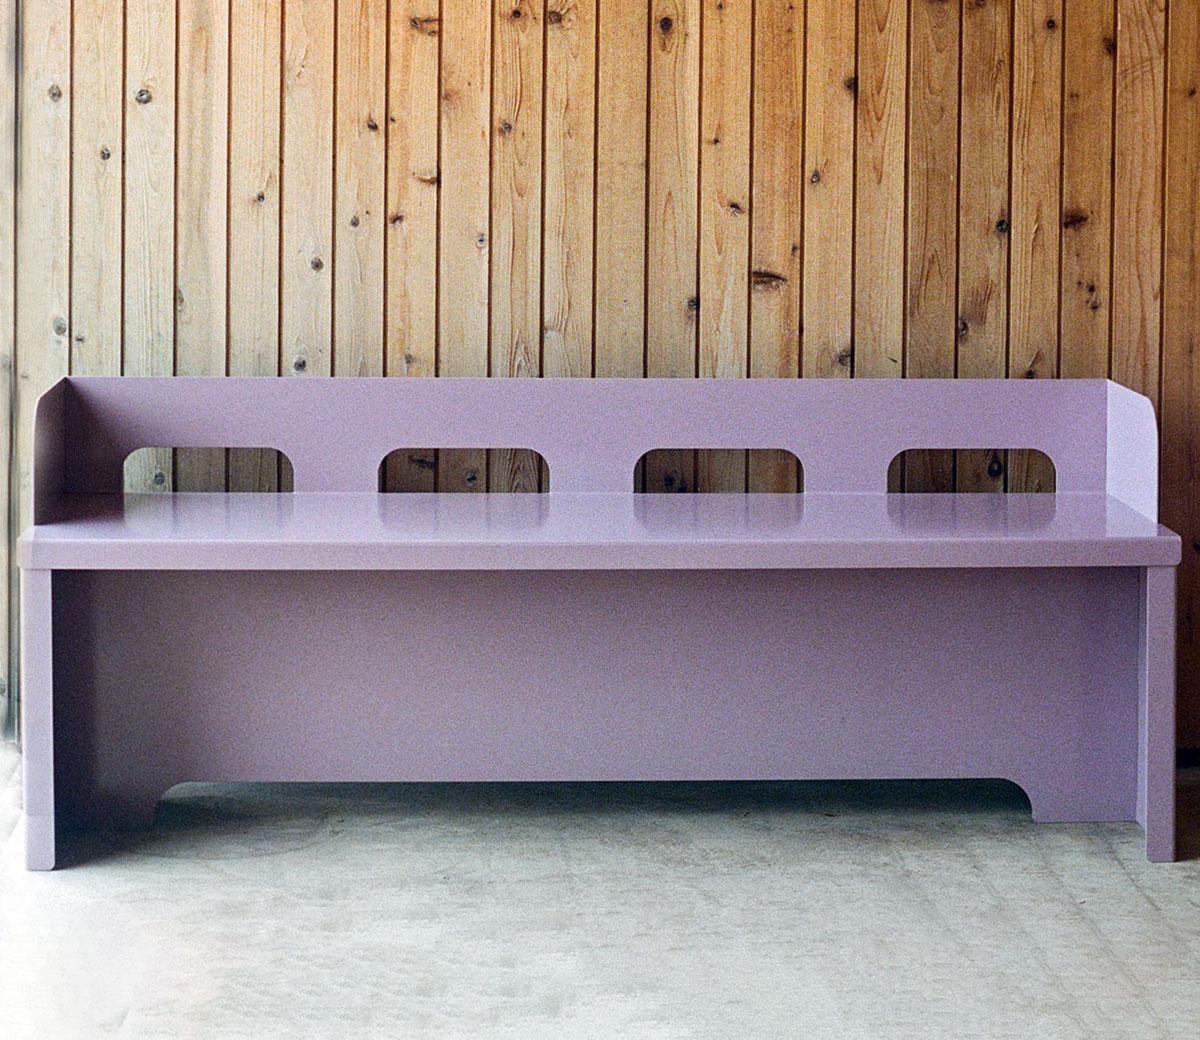 Indoor / Outdoor Lineage Bench in Powder-Coated Metal by Muhly Studio In Distressed Condition For Sale In Brooklyn, NY